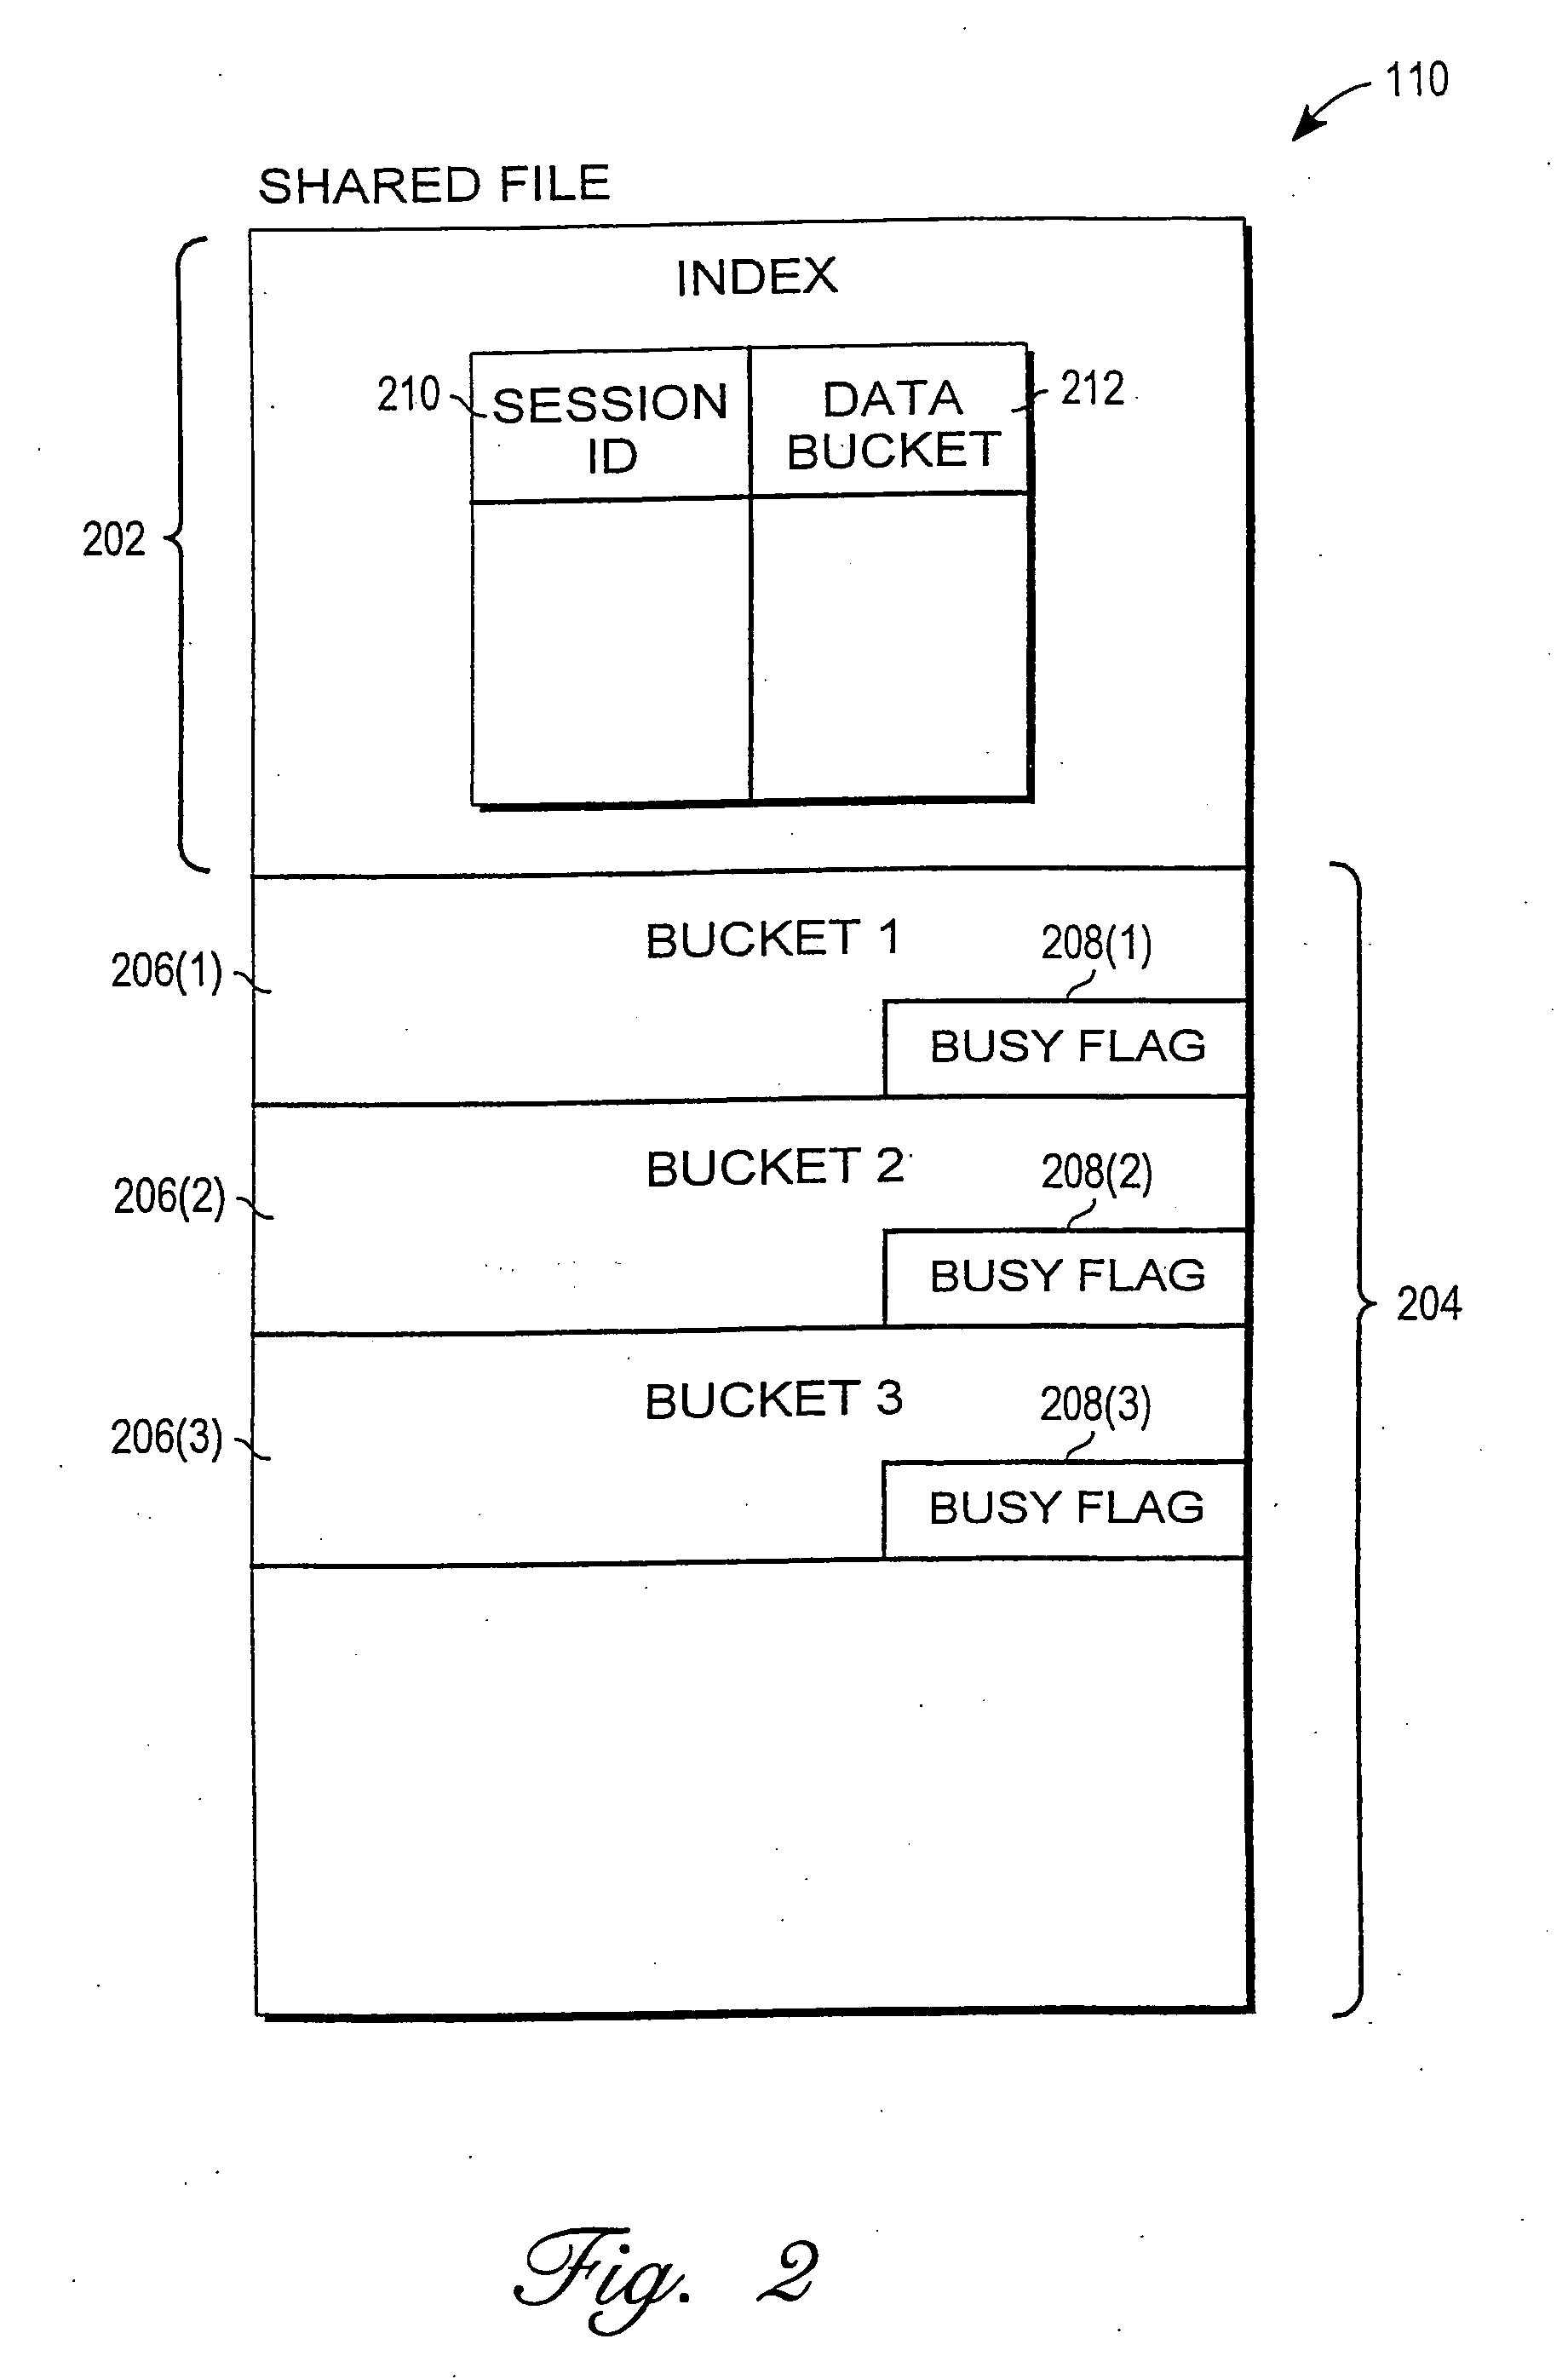 Mechanism for enabling session information to be shared across multiple processes